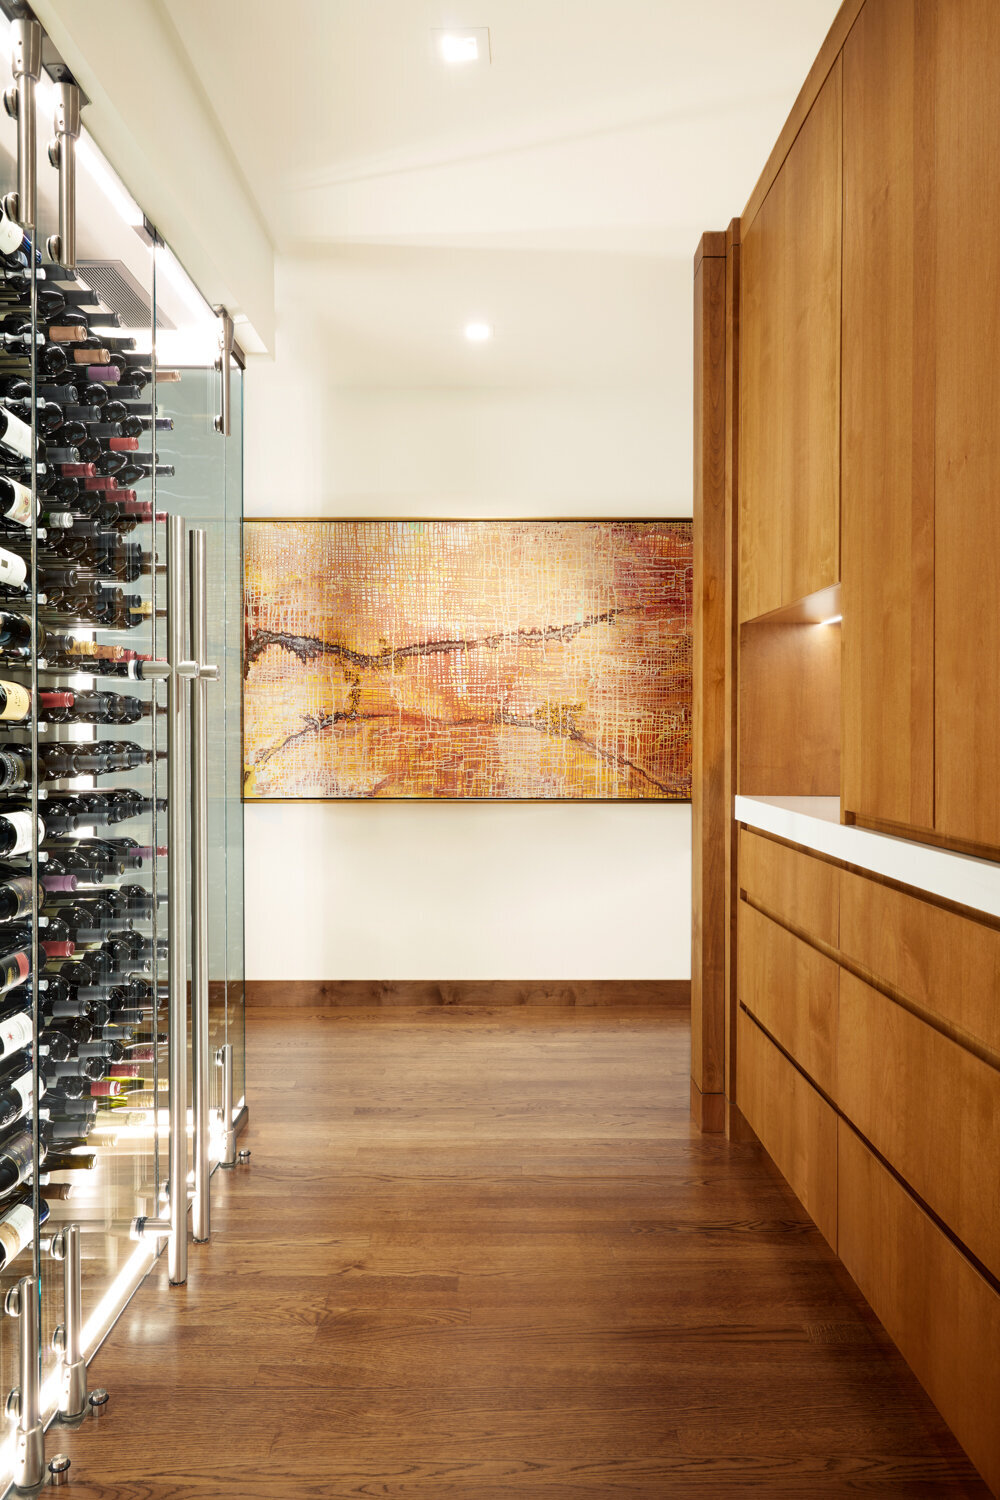 Panageries Residential Interior Design | Pacific NW Modern Dwelling Wine Wall Design